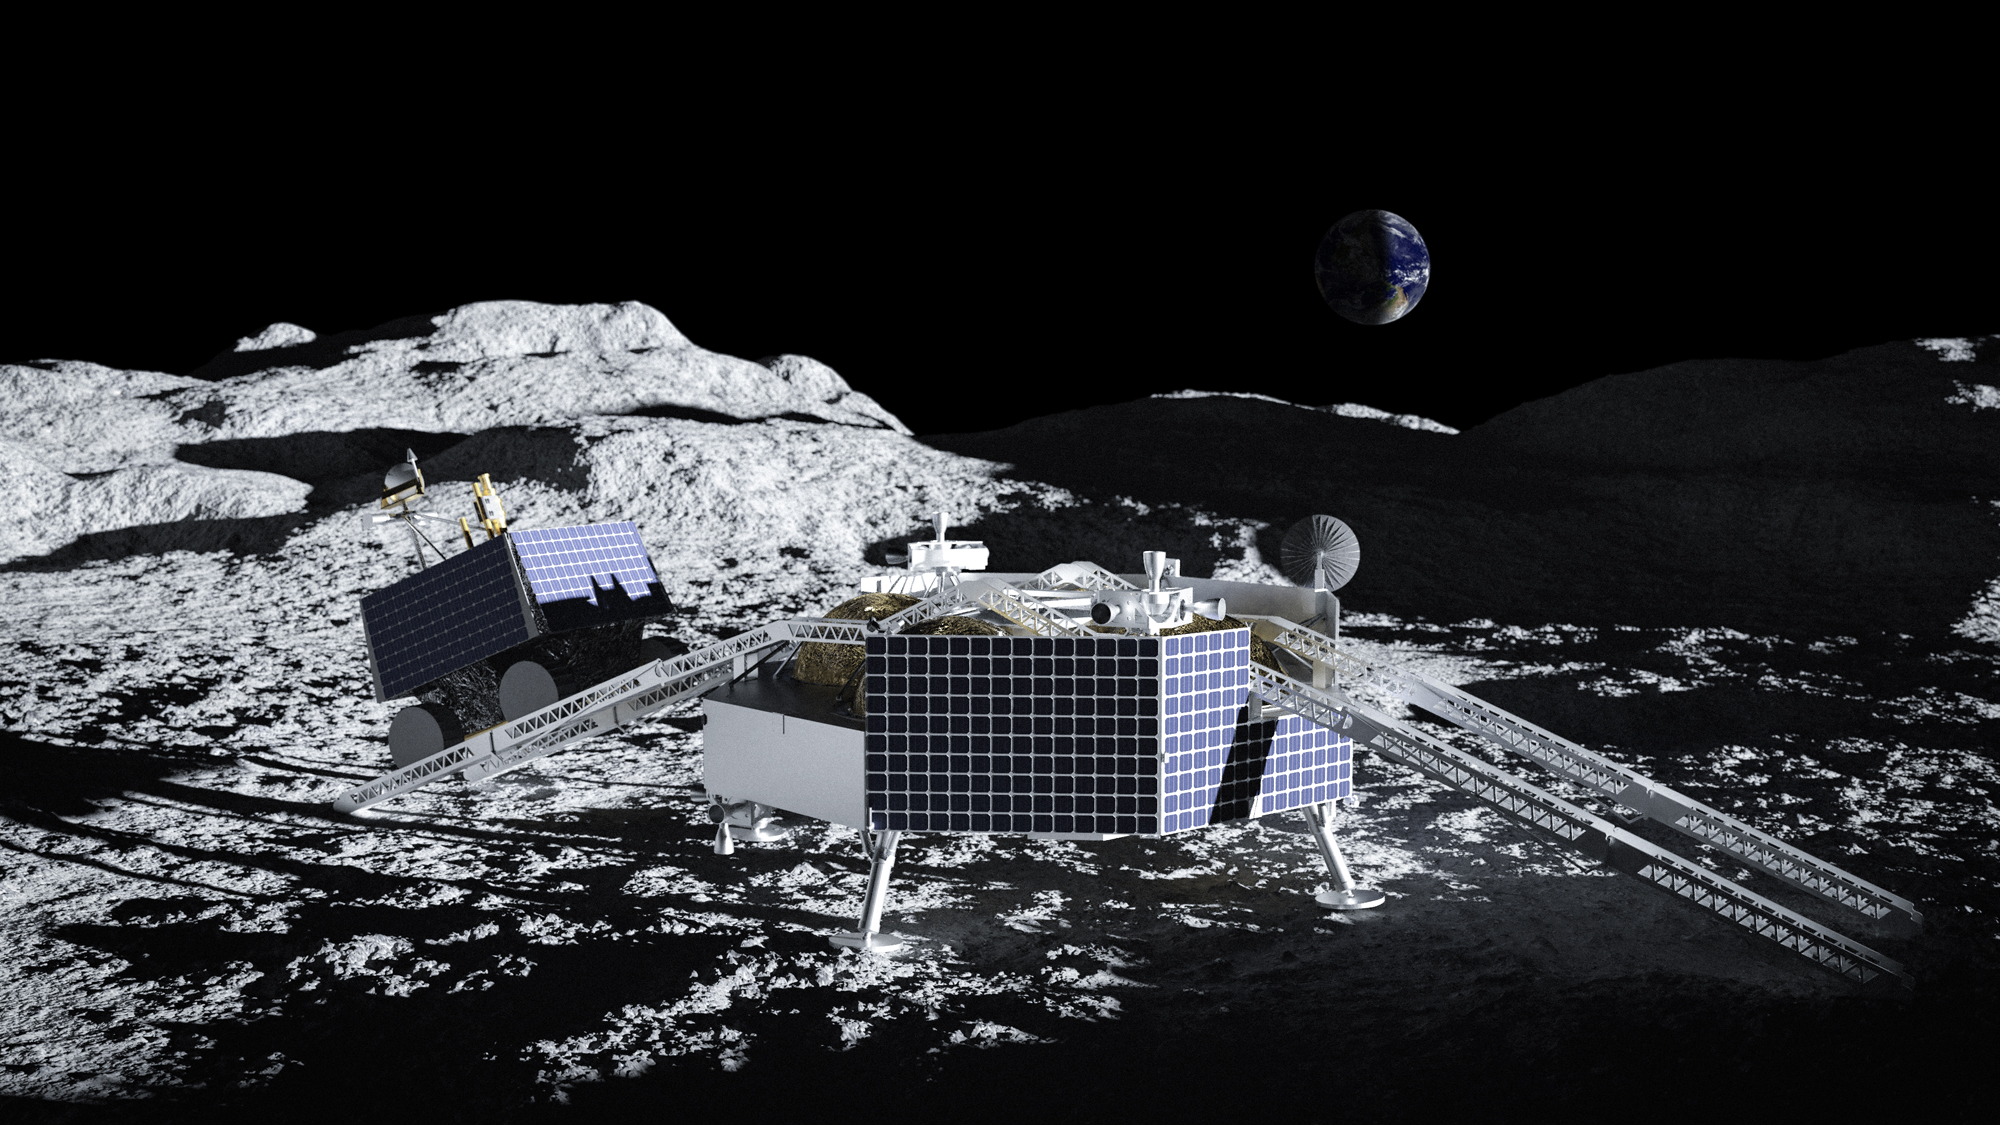 NASA's ice-hunting VIPER moon rover will ride a commercial Astrobotic Griffin lander to the moon in 2024.